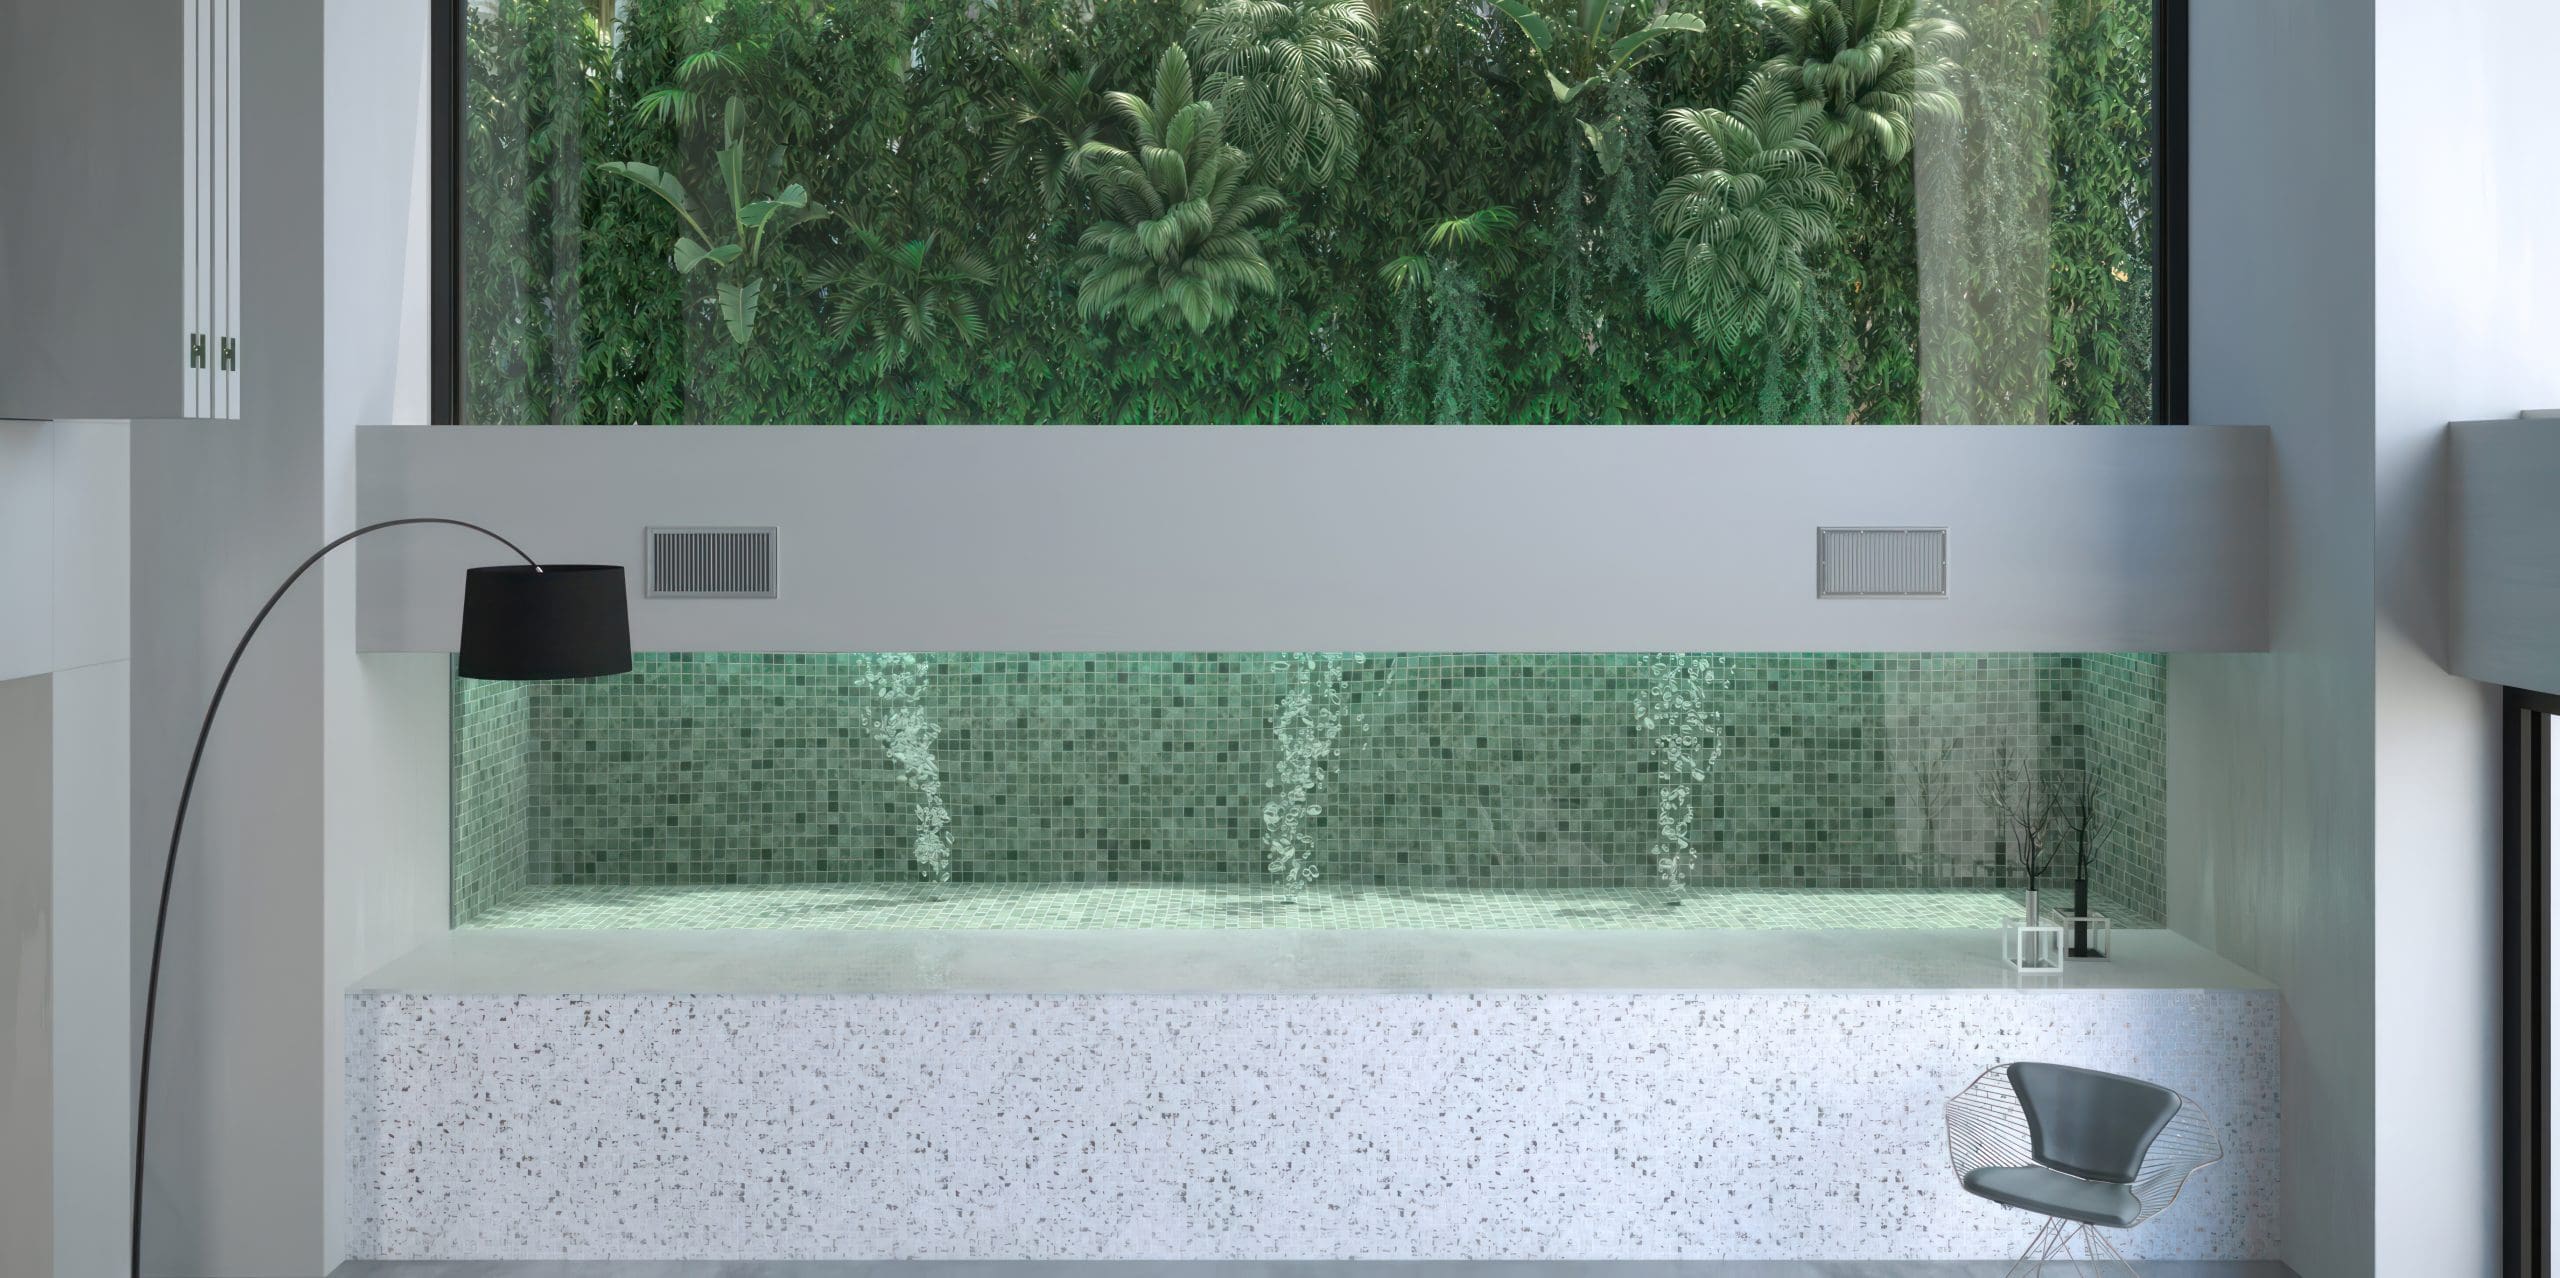 BALI STONE_RMS TRADERS_NATURAL STONE POOL MOSAIC SUPPLIER MELBOURNE (2)